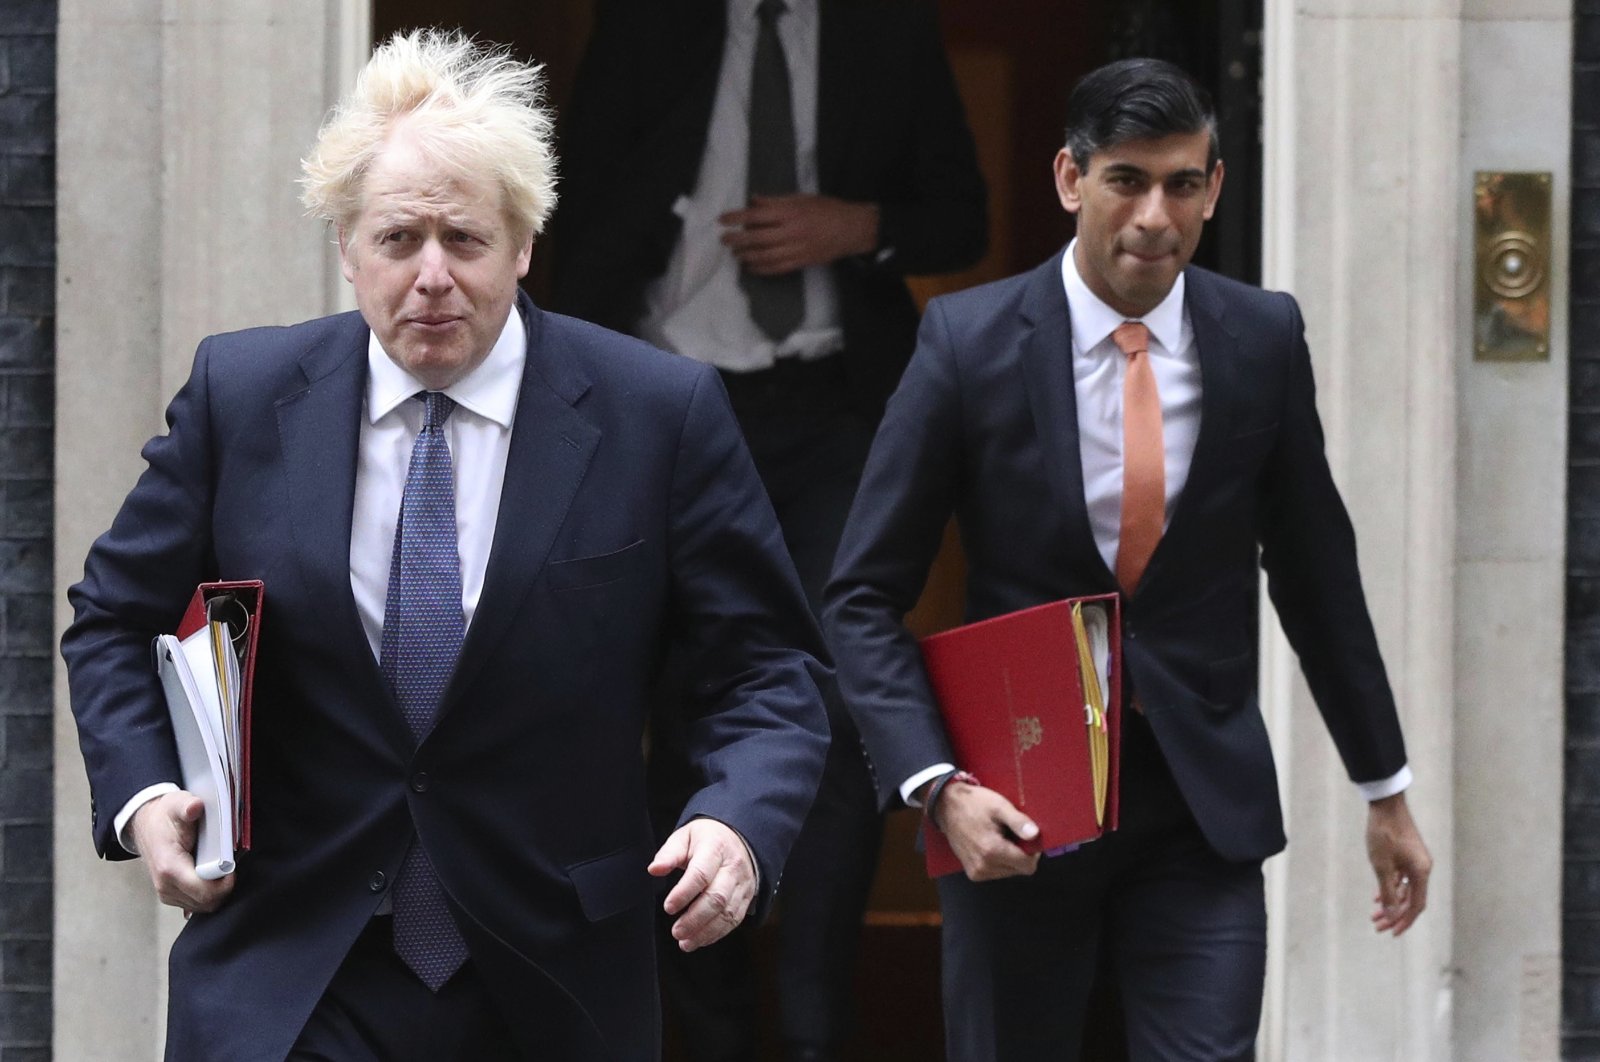 Britain's Prime Minister Boris Johnson (L) and Chancellor of the Exchequer Rishi Sunak leave 10 Downing Street London, ahead of a Cabinet meeting at the Foreign and Commonwealth Office, Oct. 13, 2020. (AP Photo)